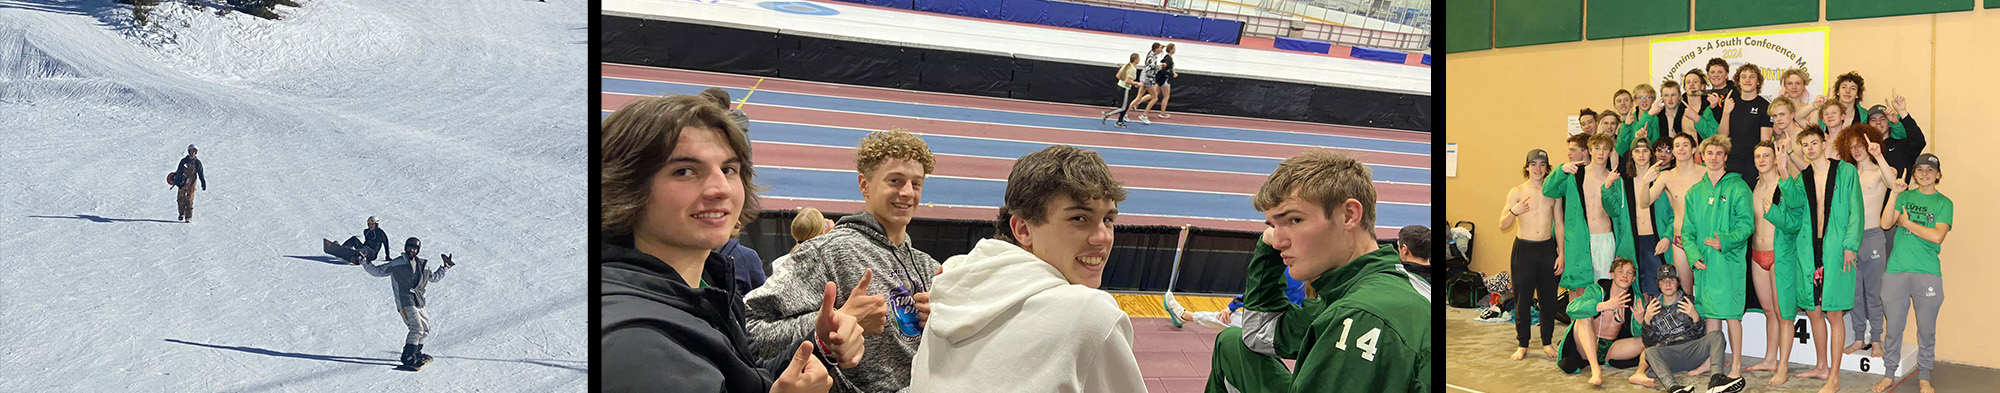 Students skiing, Boys at an indoor track meet, and boy swimming group photo